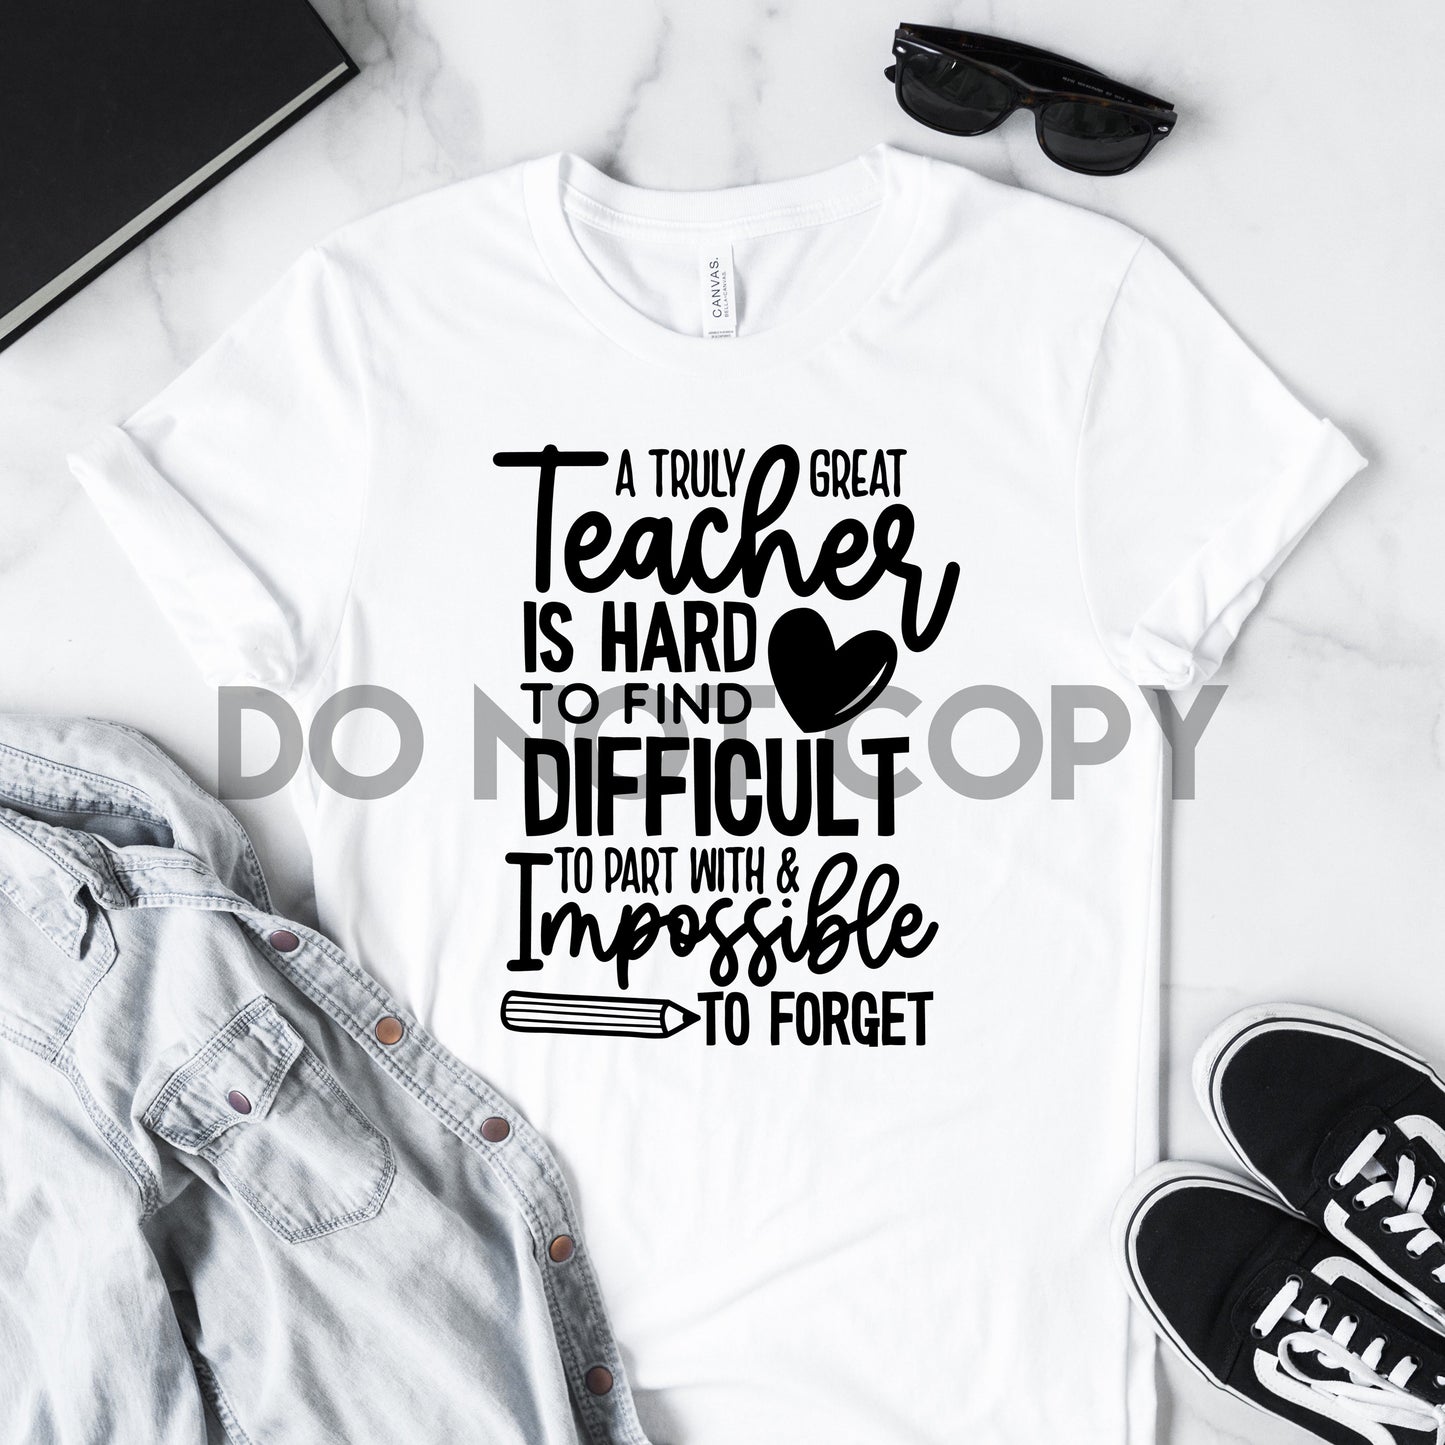 A Truly Great Teacher is Hard to Find Difficult to Part & Impossible to Forget Dream Print or Sublimation Print